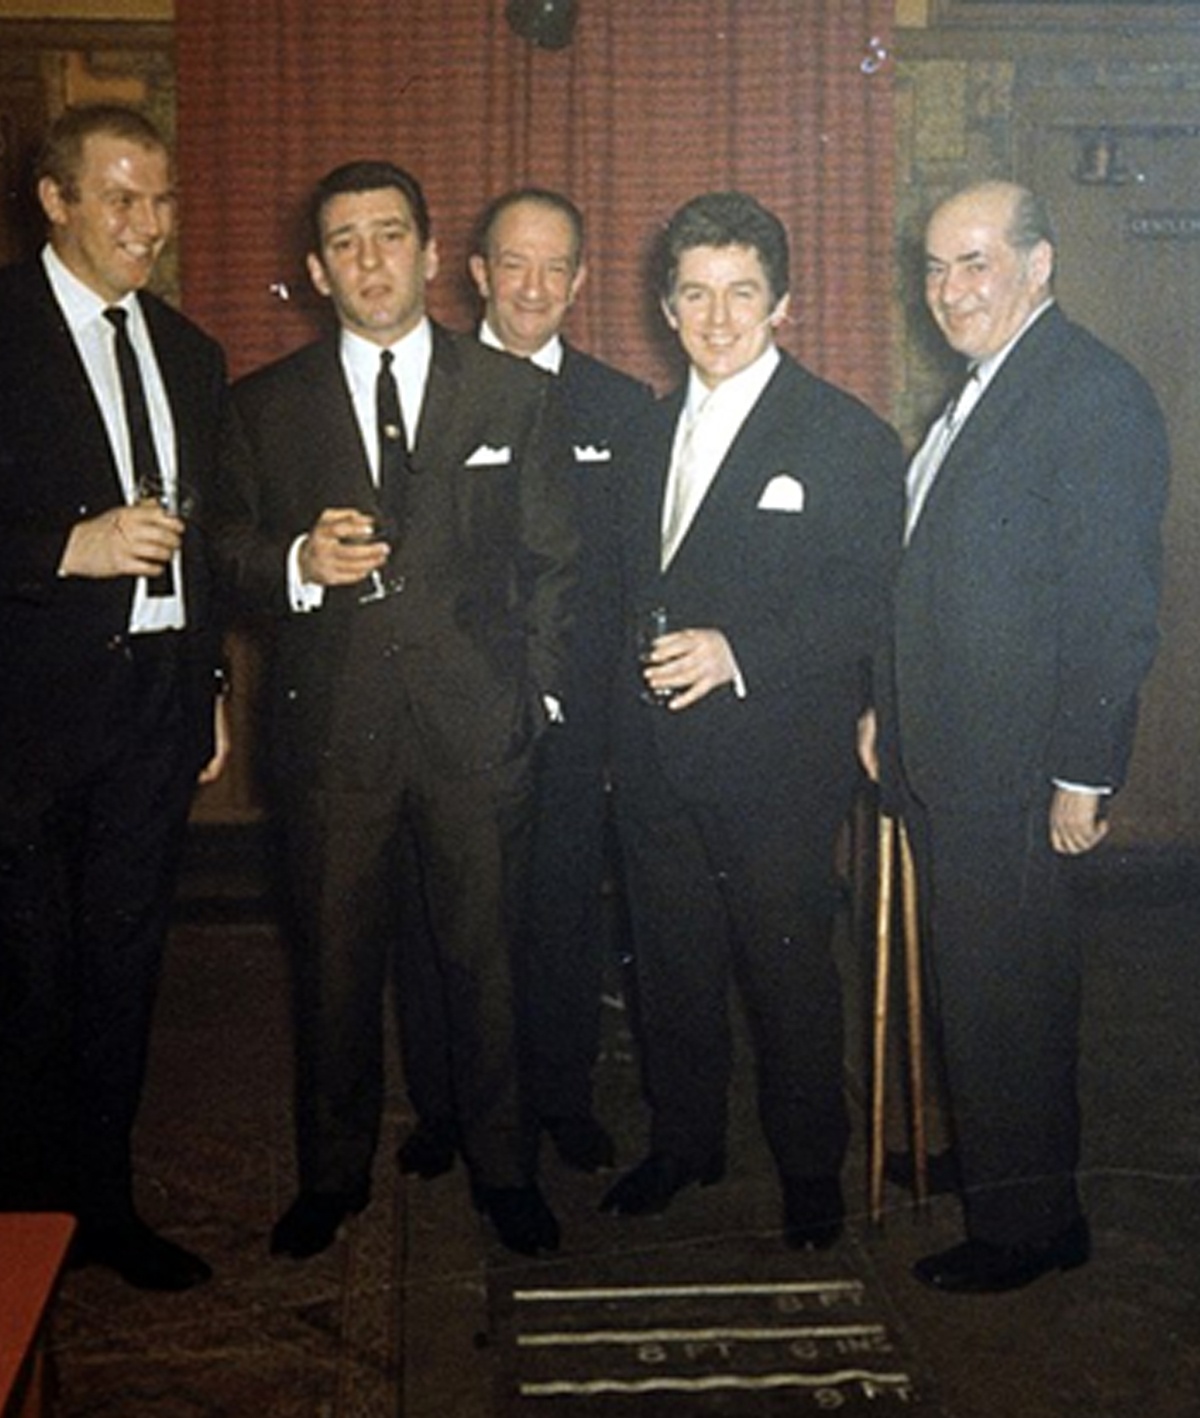 Photograph of London gangster Reggie Kray (second left) taken in the months leading up to his trial in 1968.